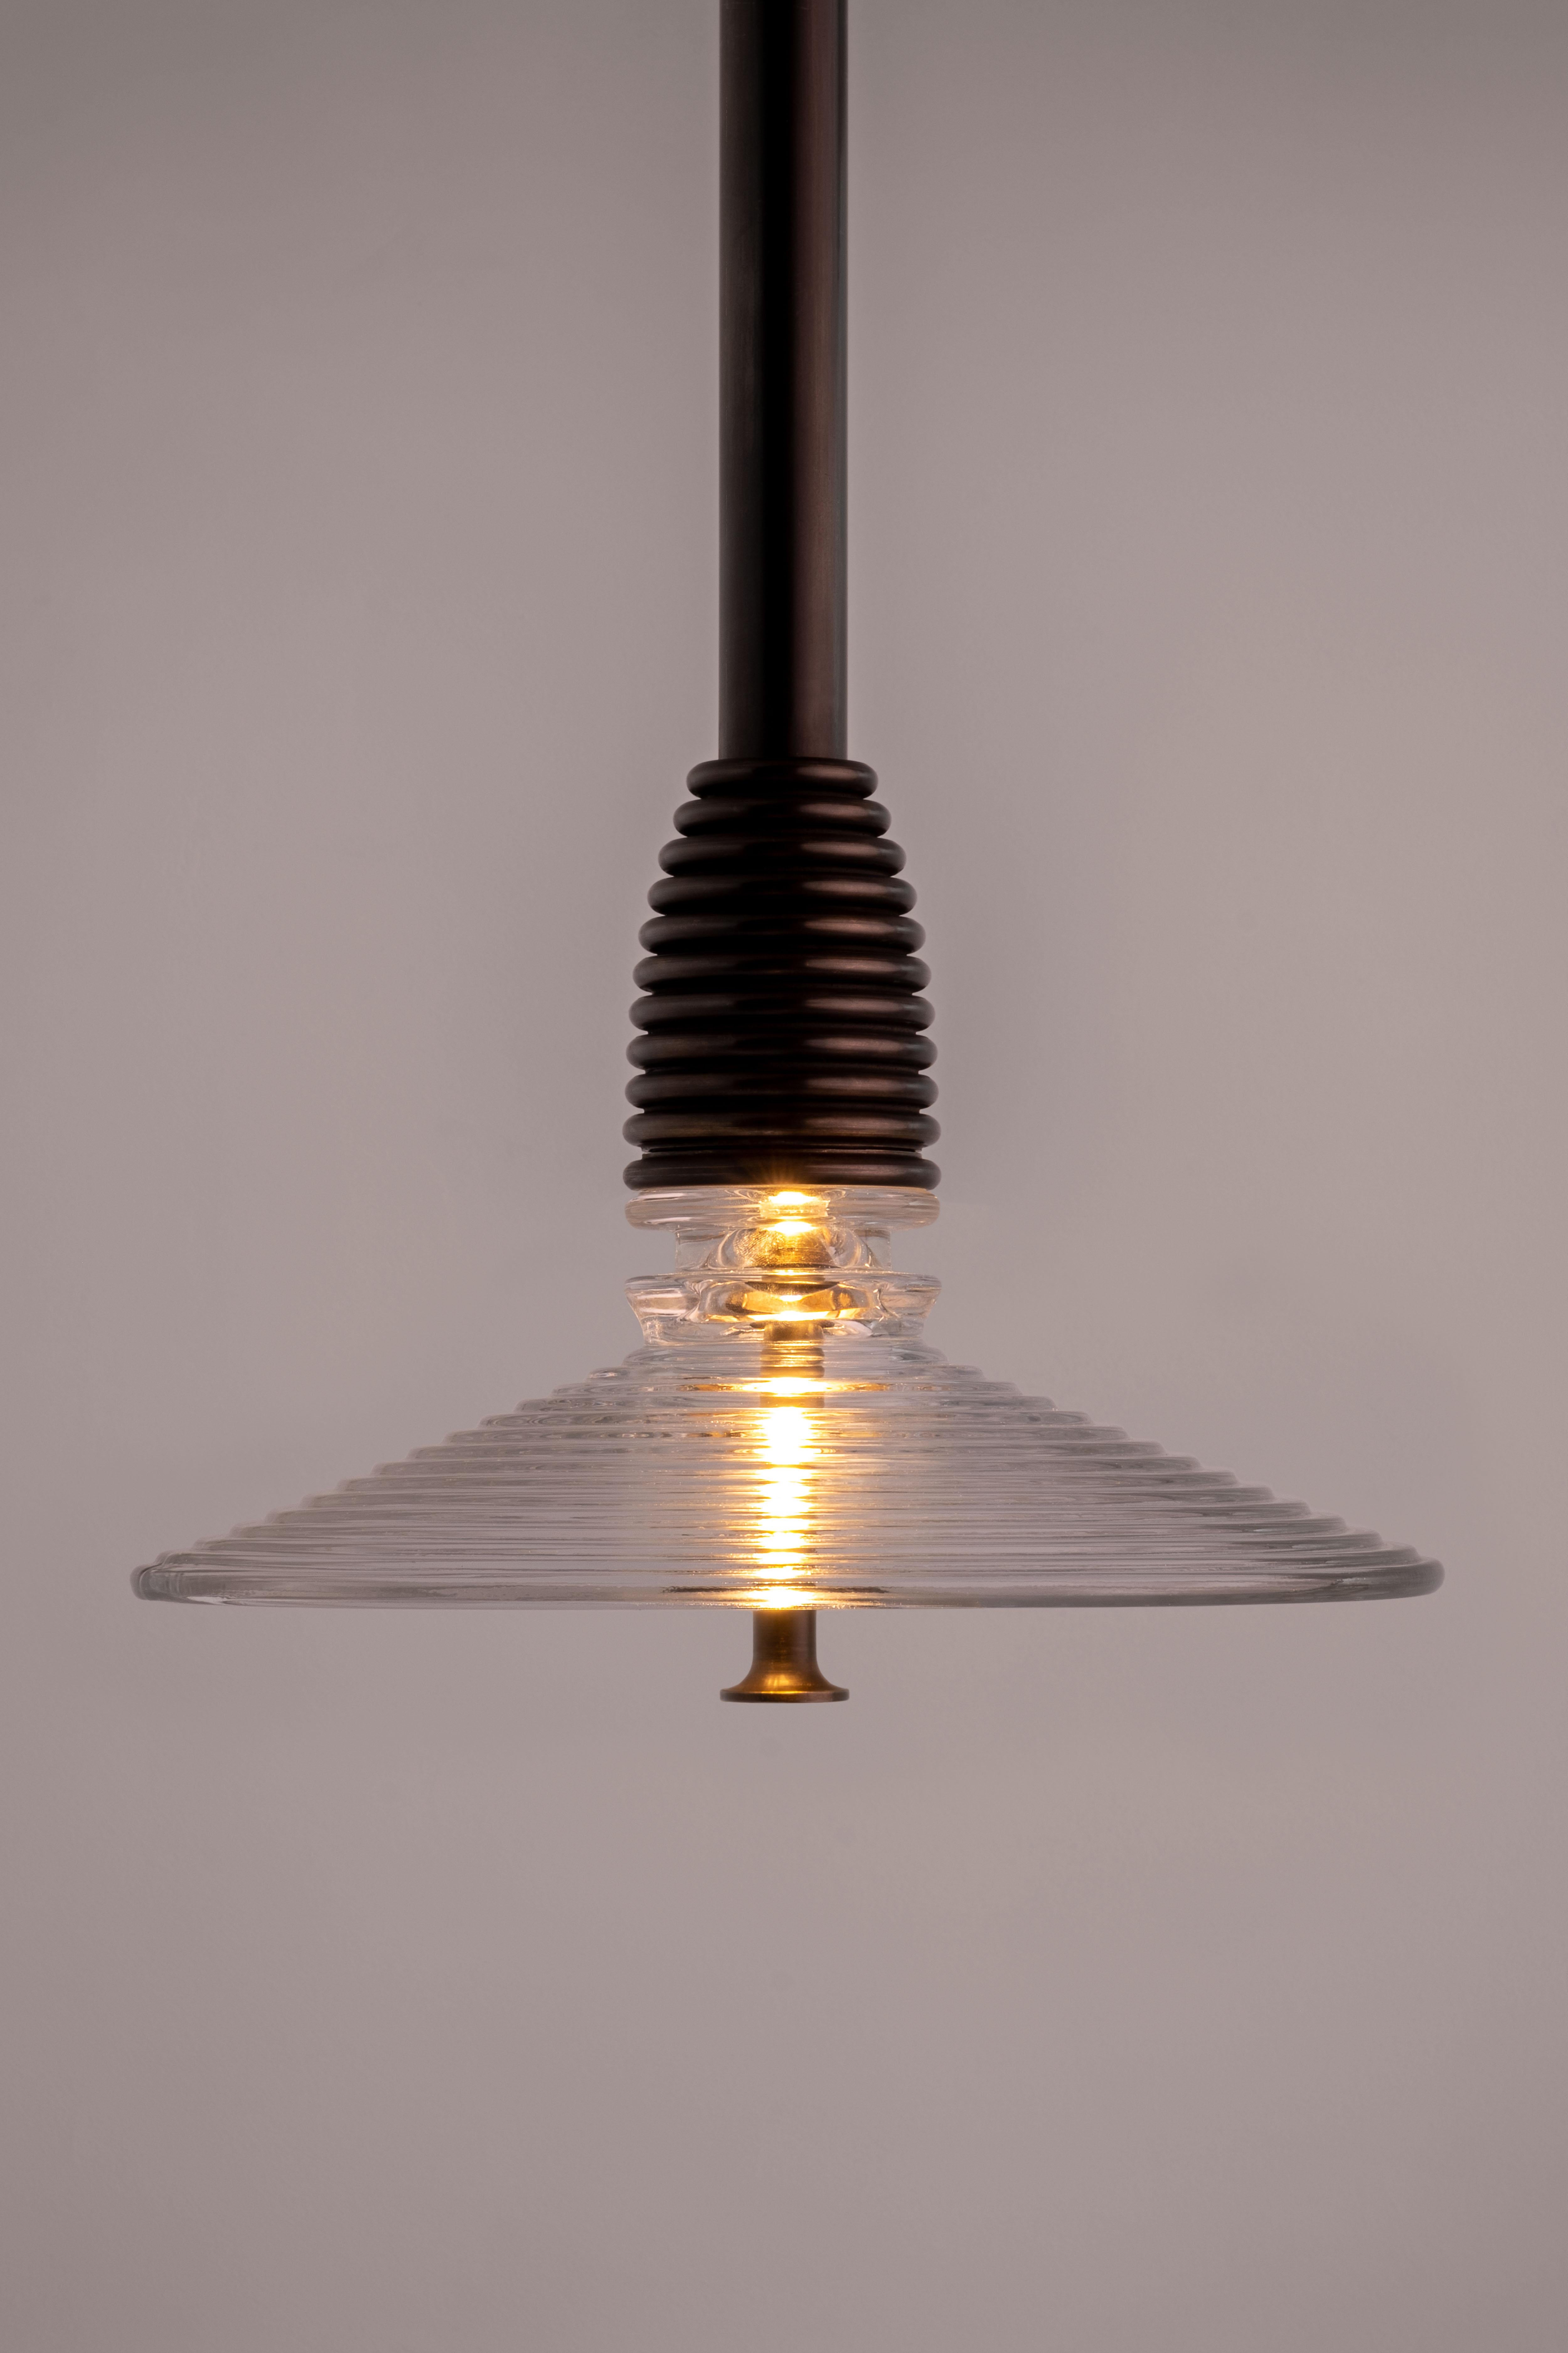 Brass The Insulator 'B' Pendant in dark brass and clear glass by NOVOCASTRIAN deco For Sale